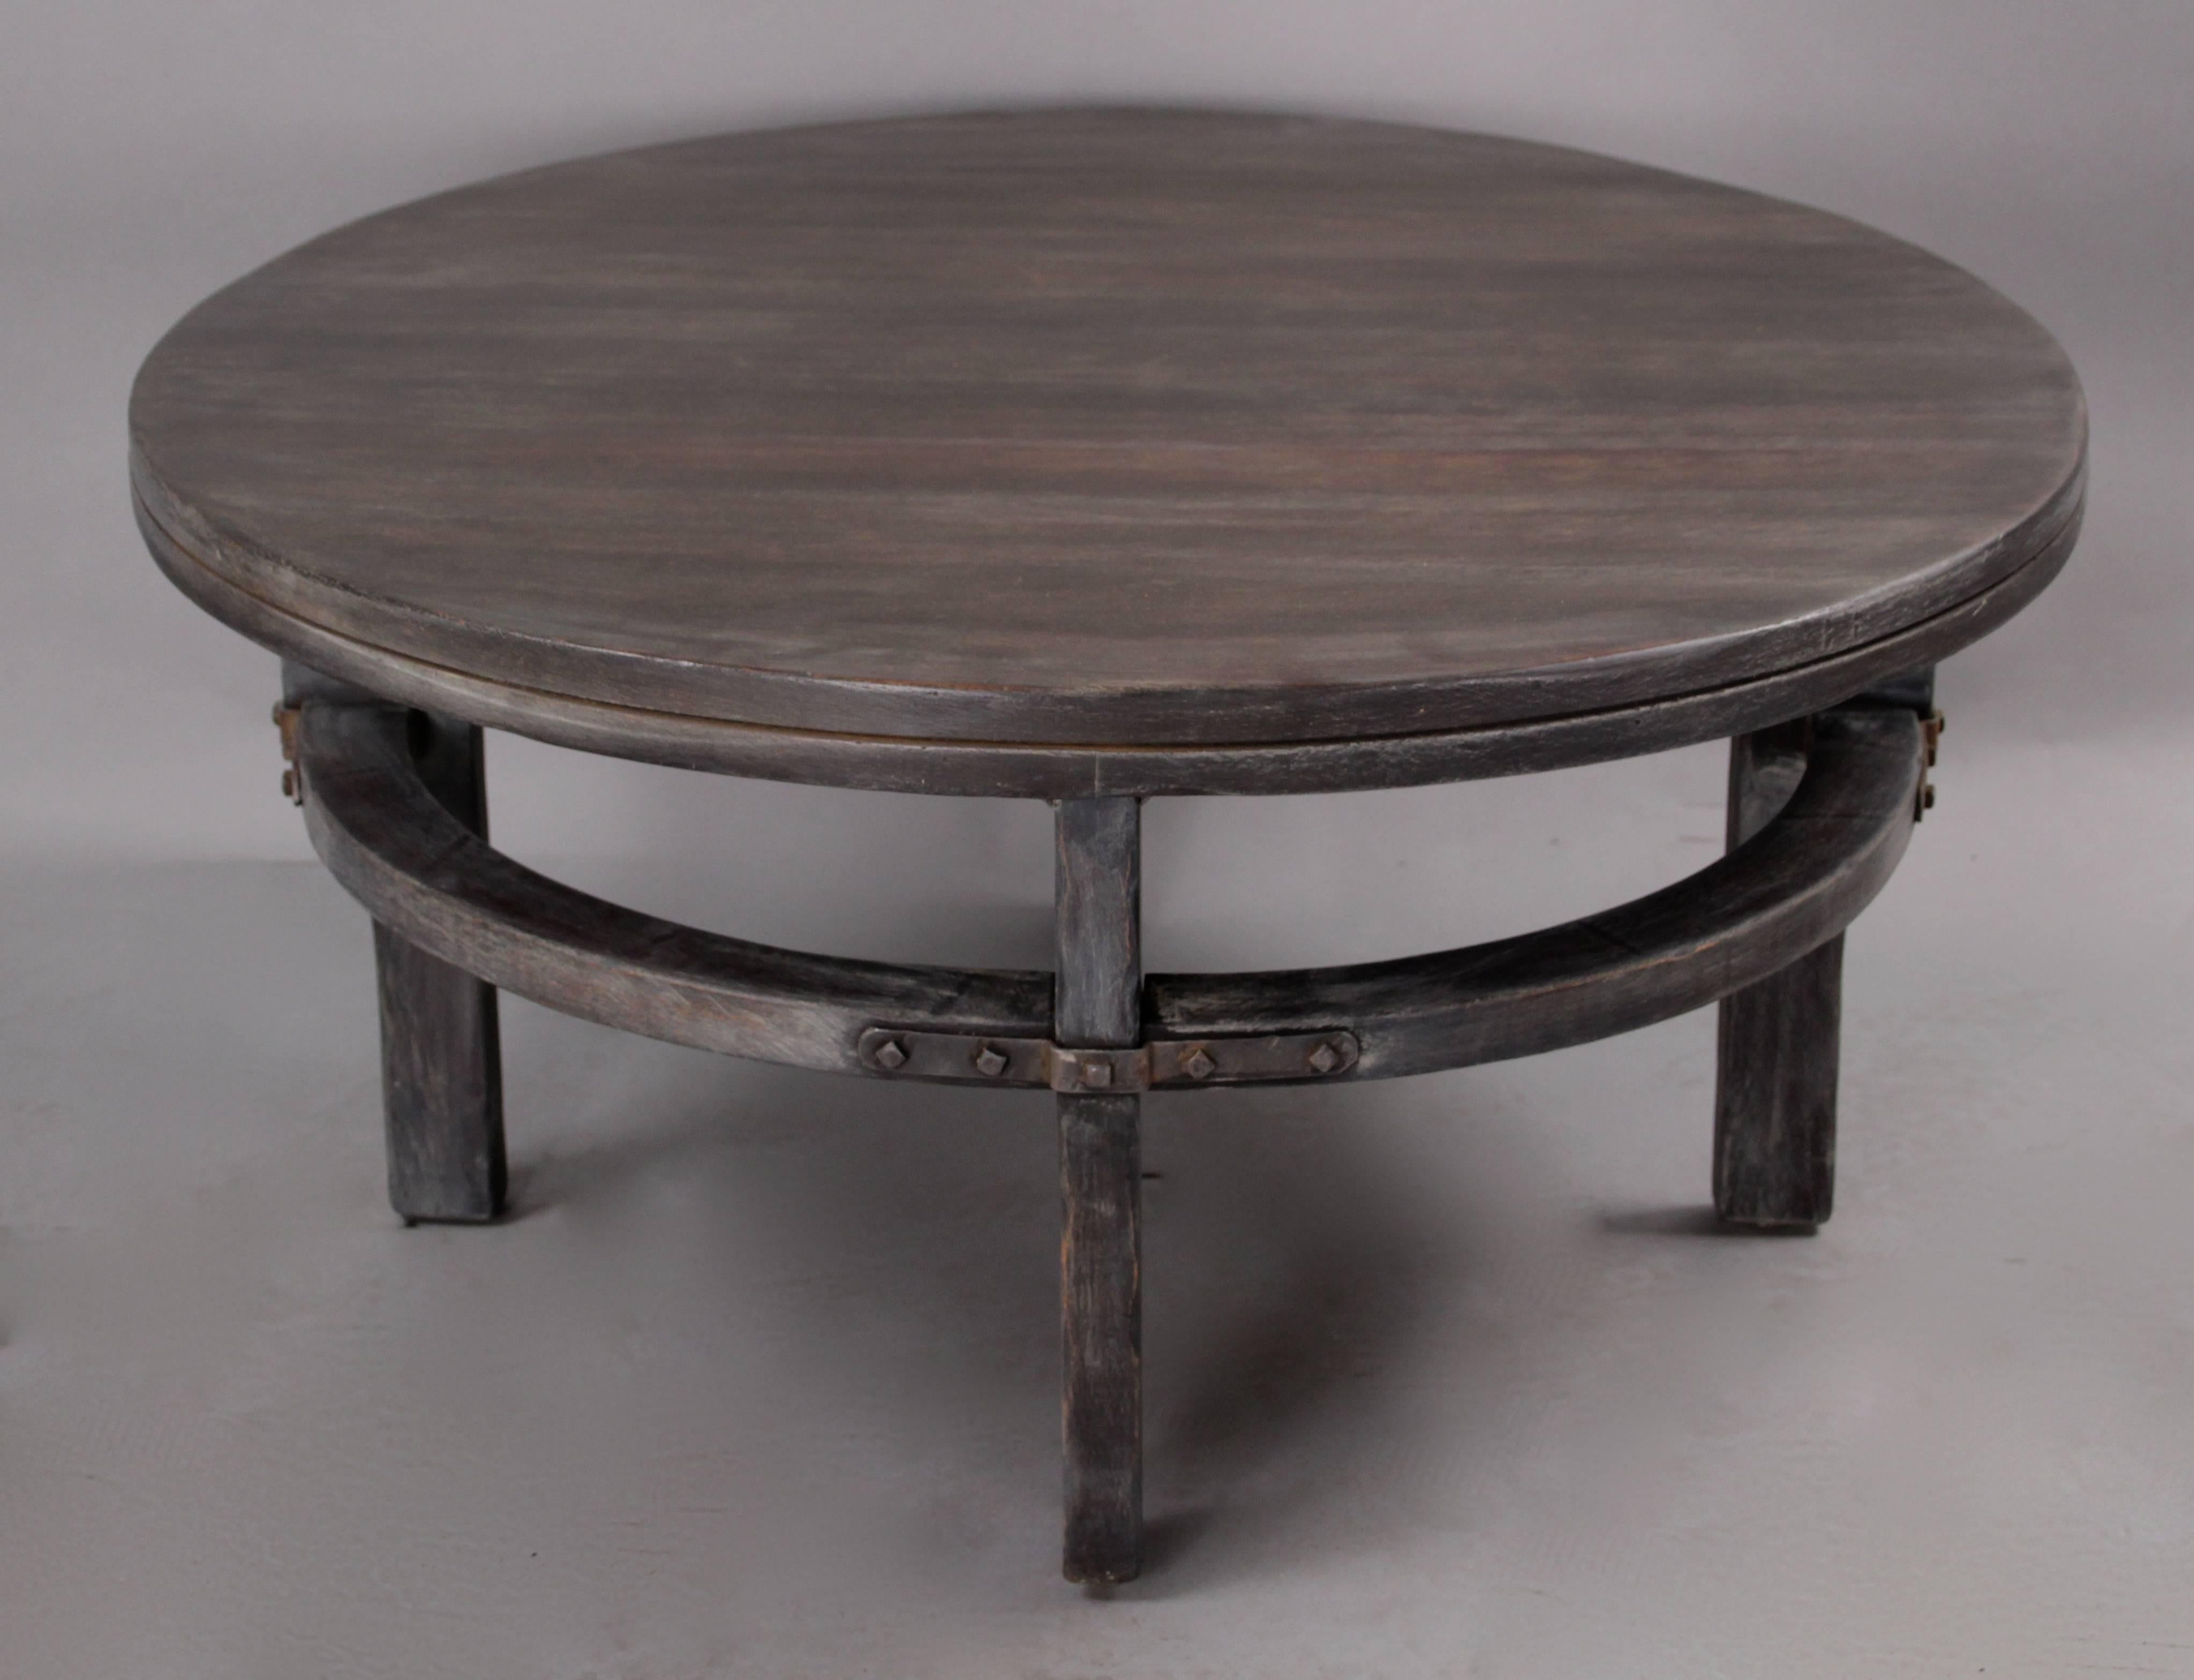 American 1930s Round Monterey Coffee Table with Old Wood Finish